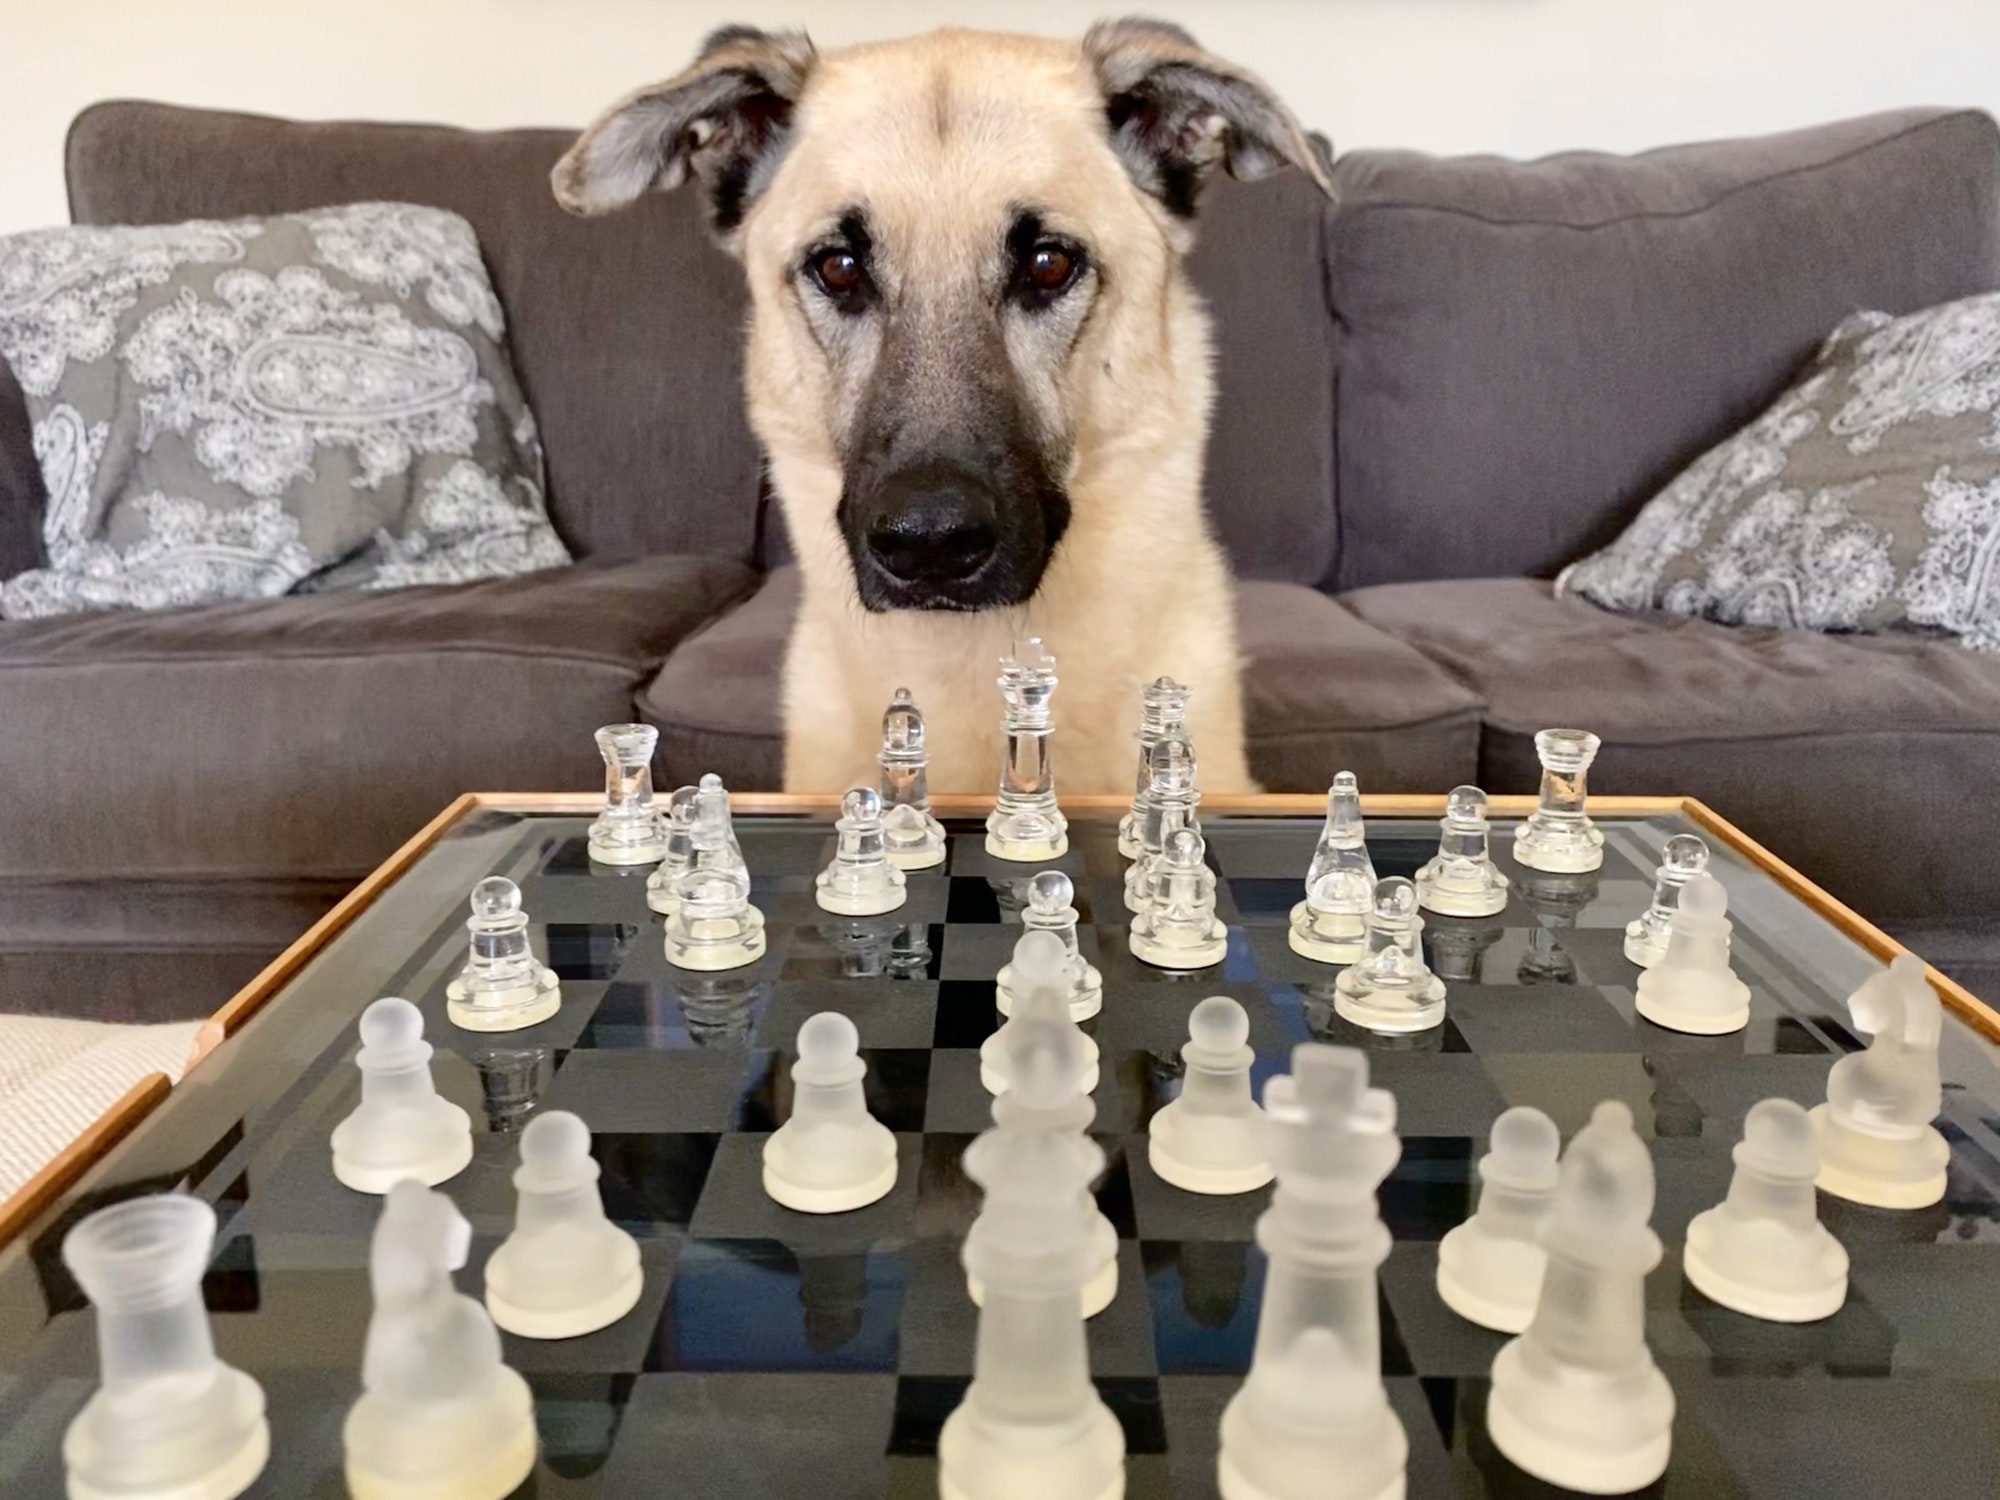 A smart dog playing a game of chess at home.